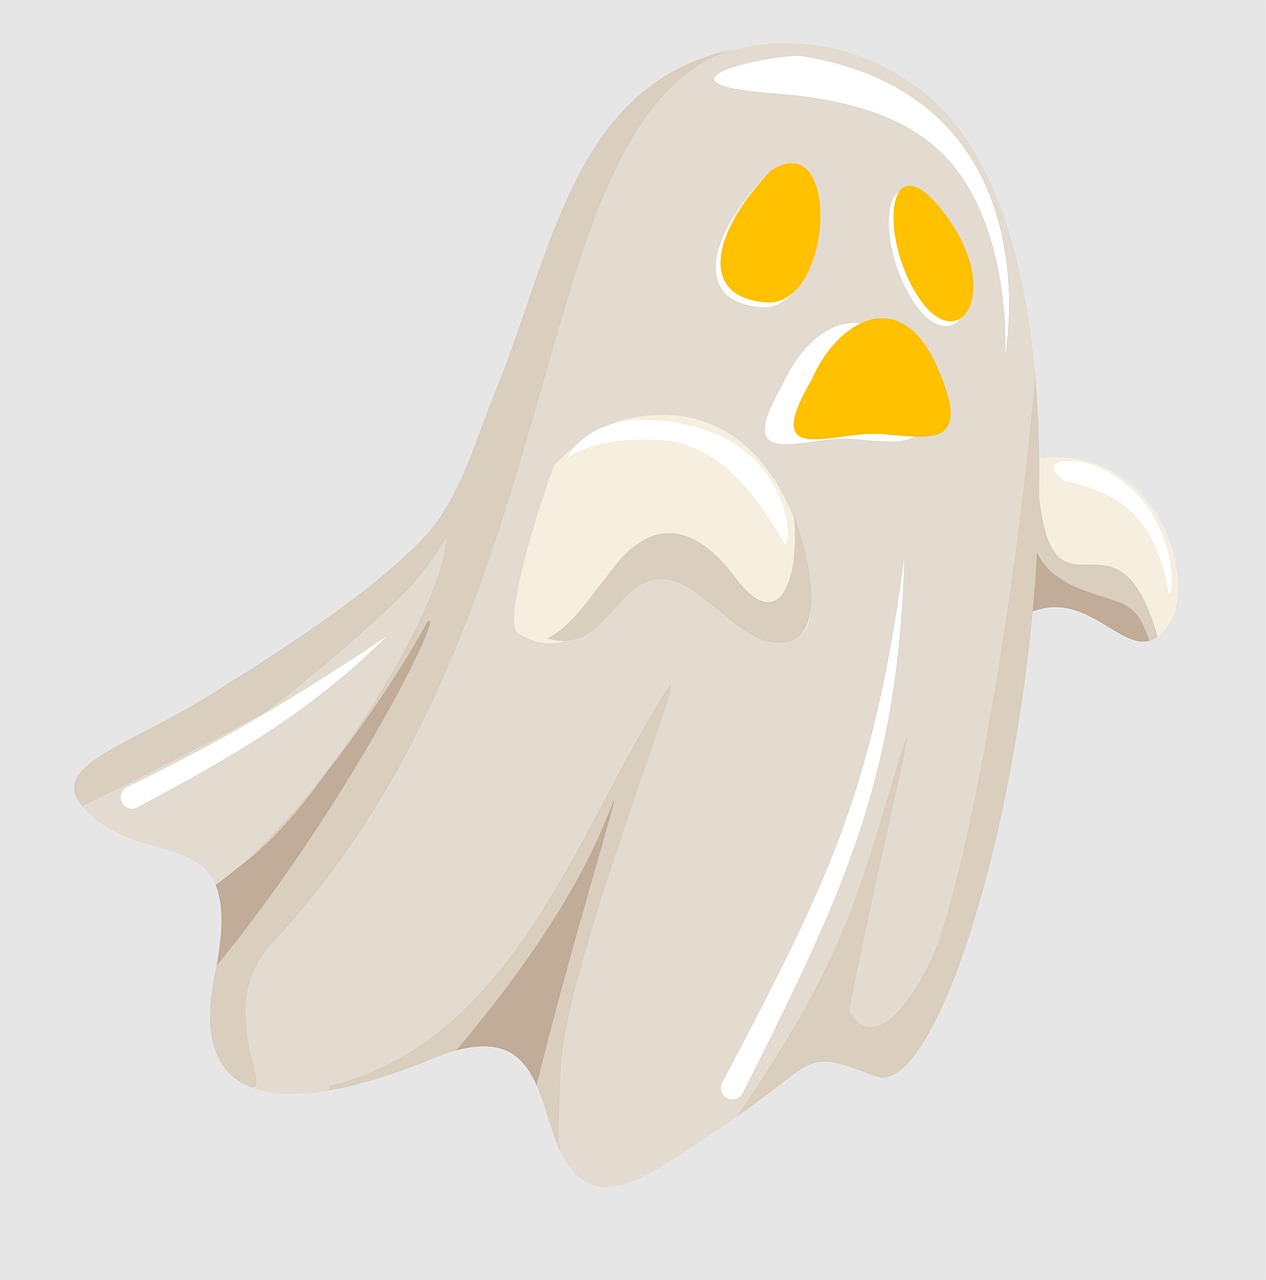 a white ghost with orange eyes on a gray background, an illustration of, mingei, accurate illustration, yellowed, game asset, no type